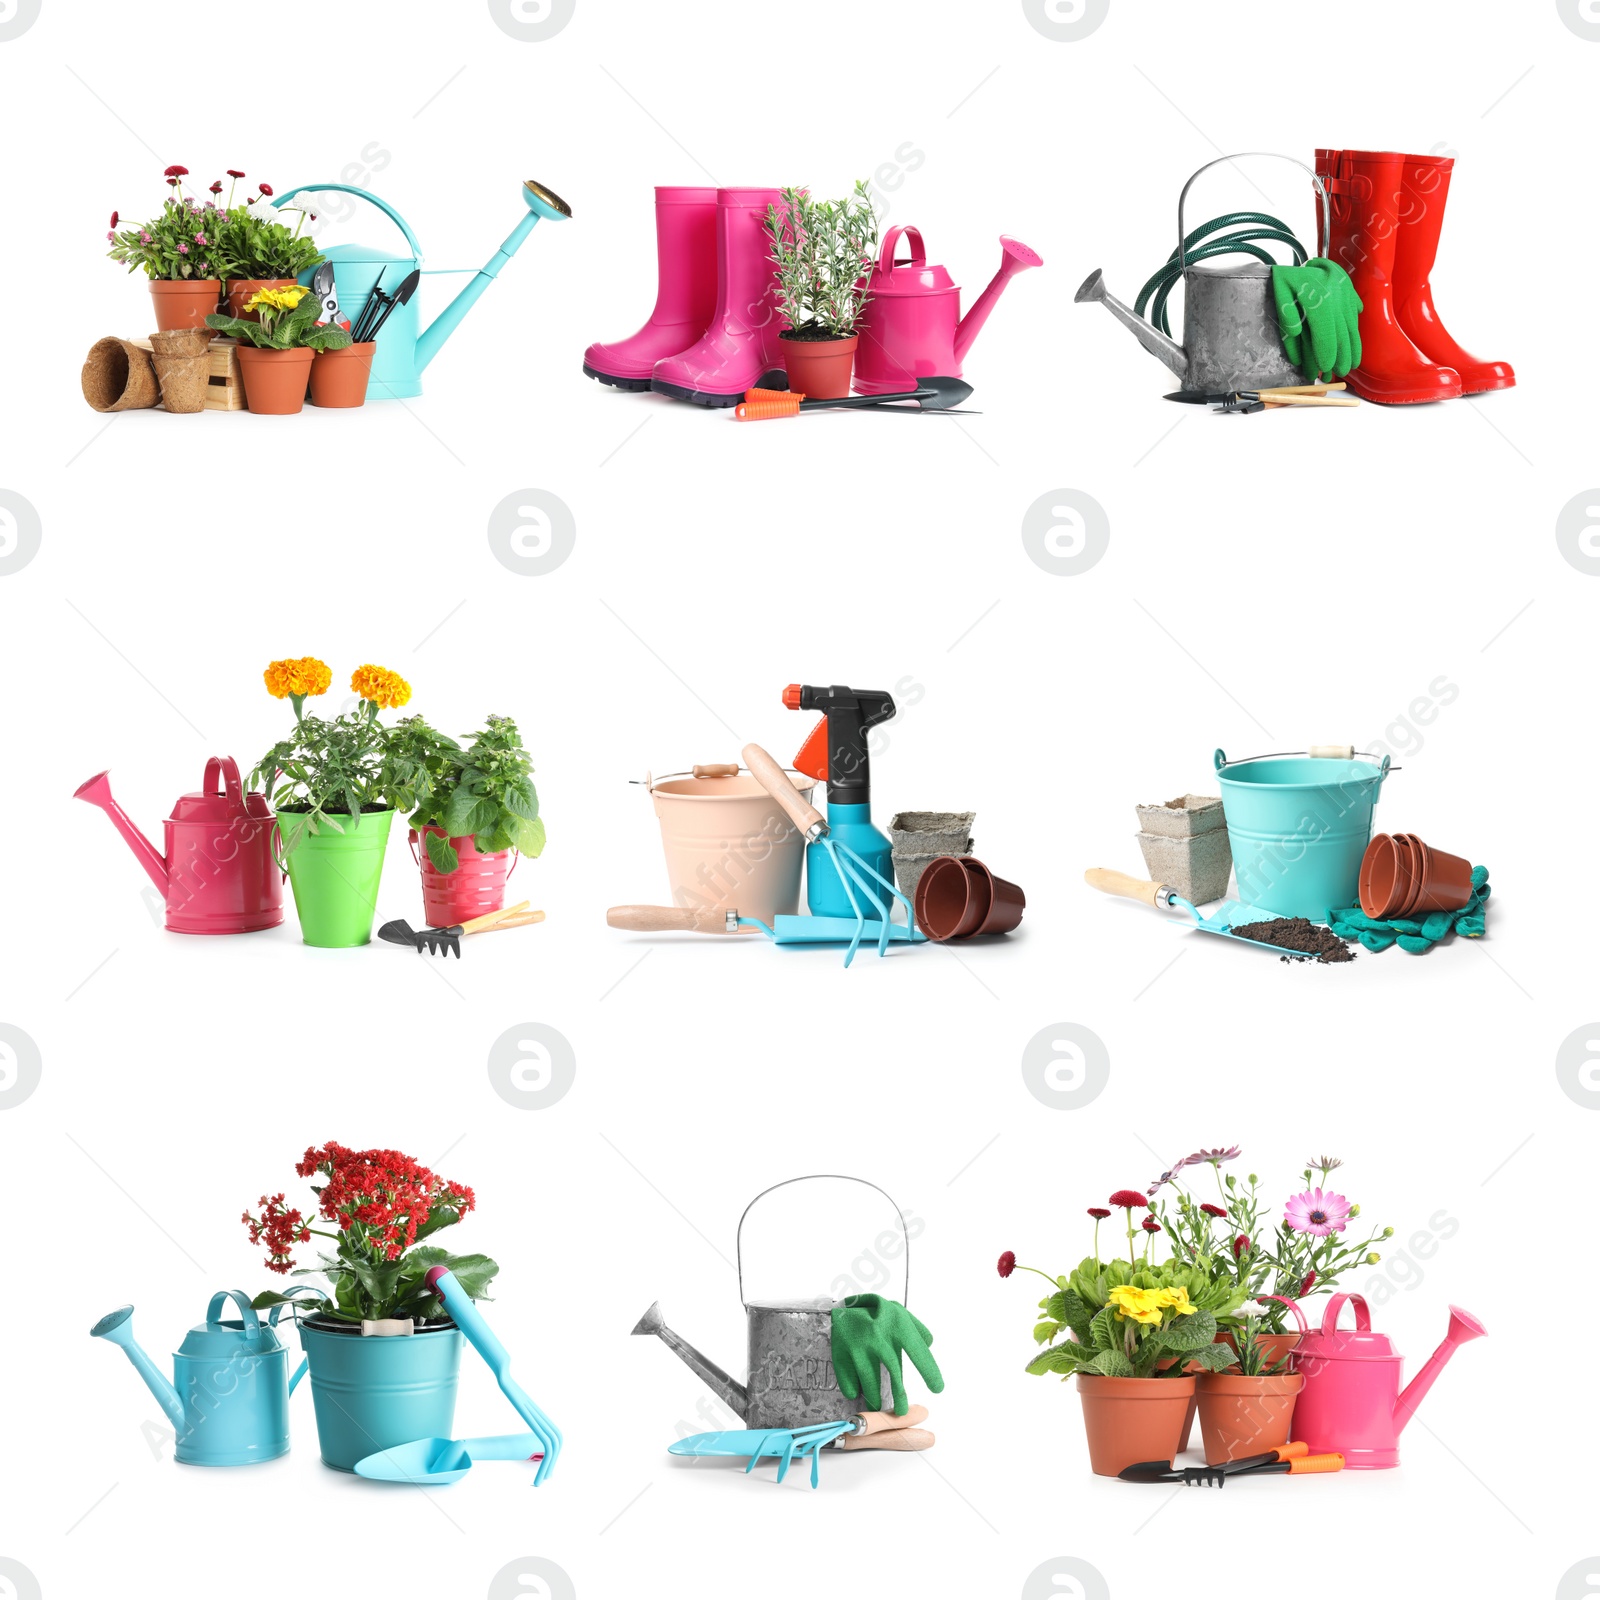 Image of Set with different gardening tools and plants on white background 